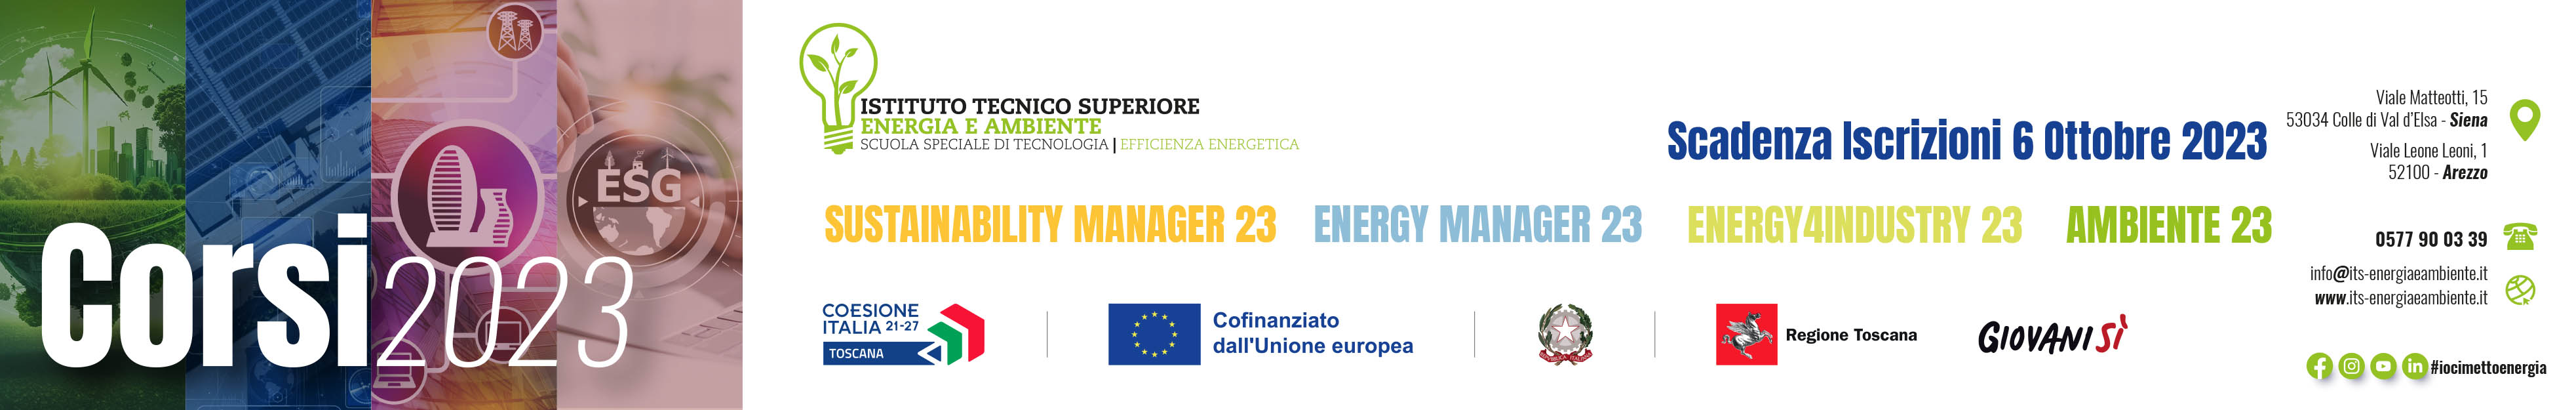 Banner Corsi ITS Energia e Ambient (1).jpg